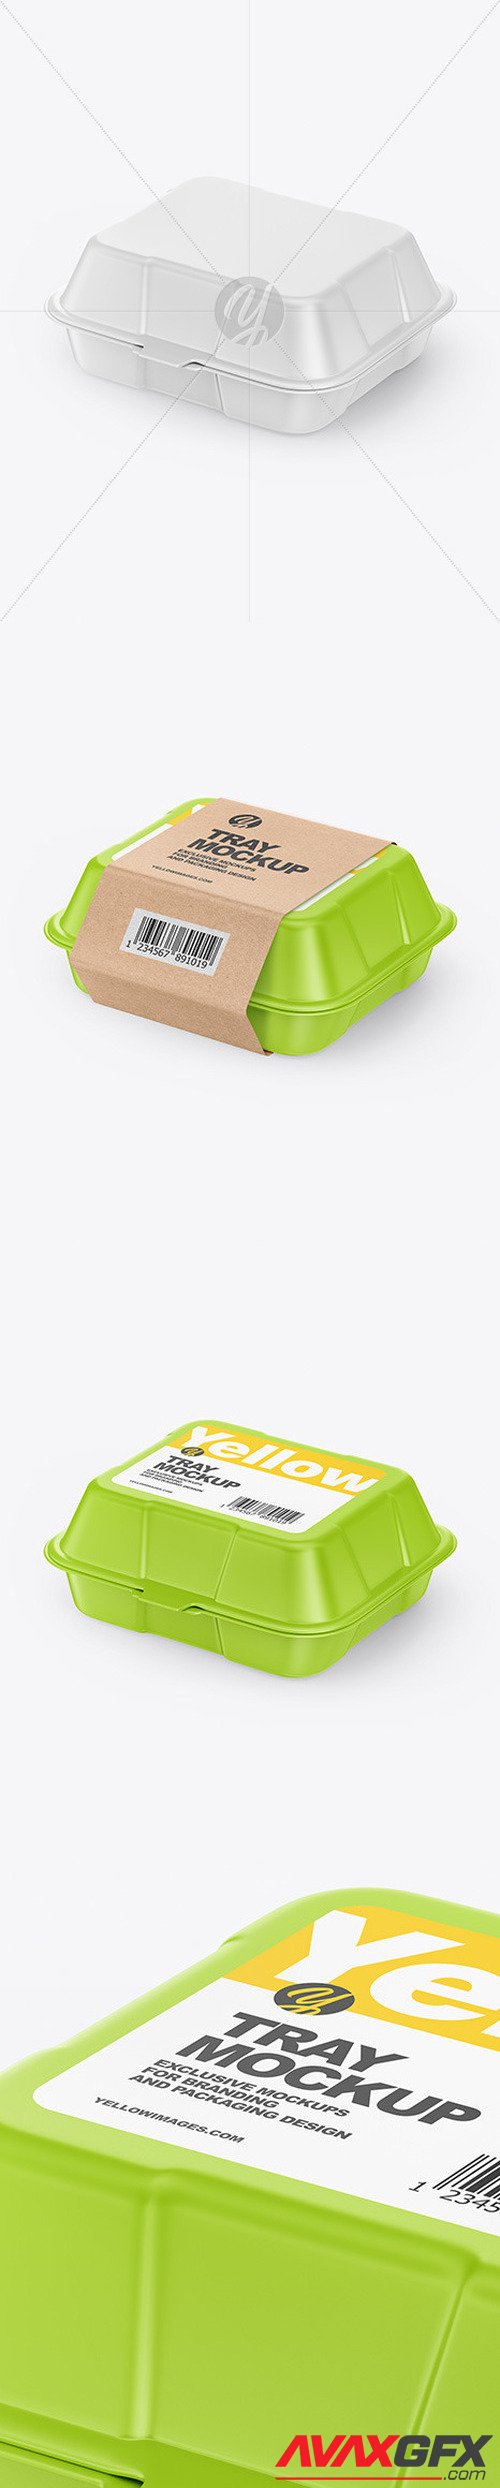 Matte Tray with Paper Label Mockup 53756 [TIF]